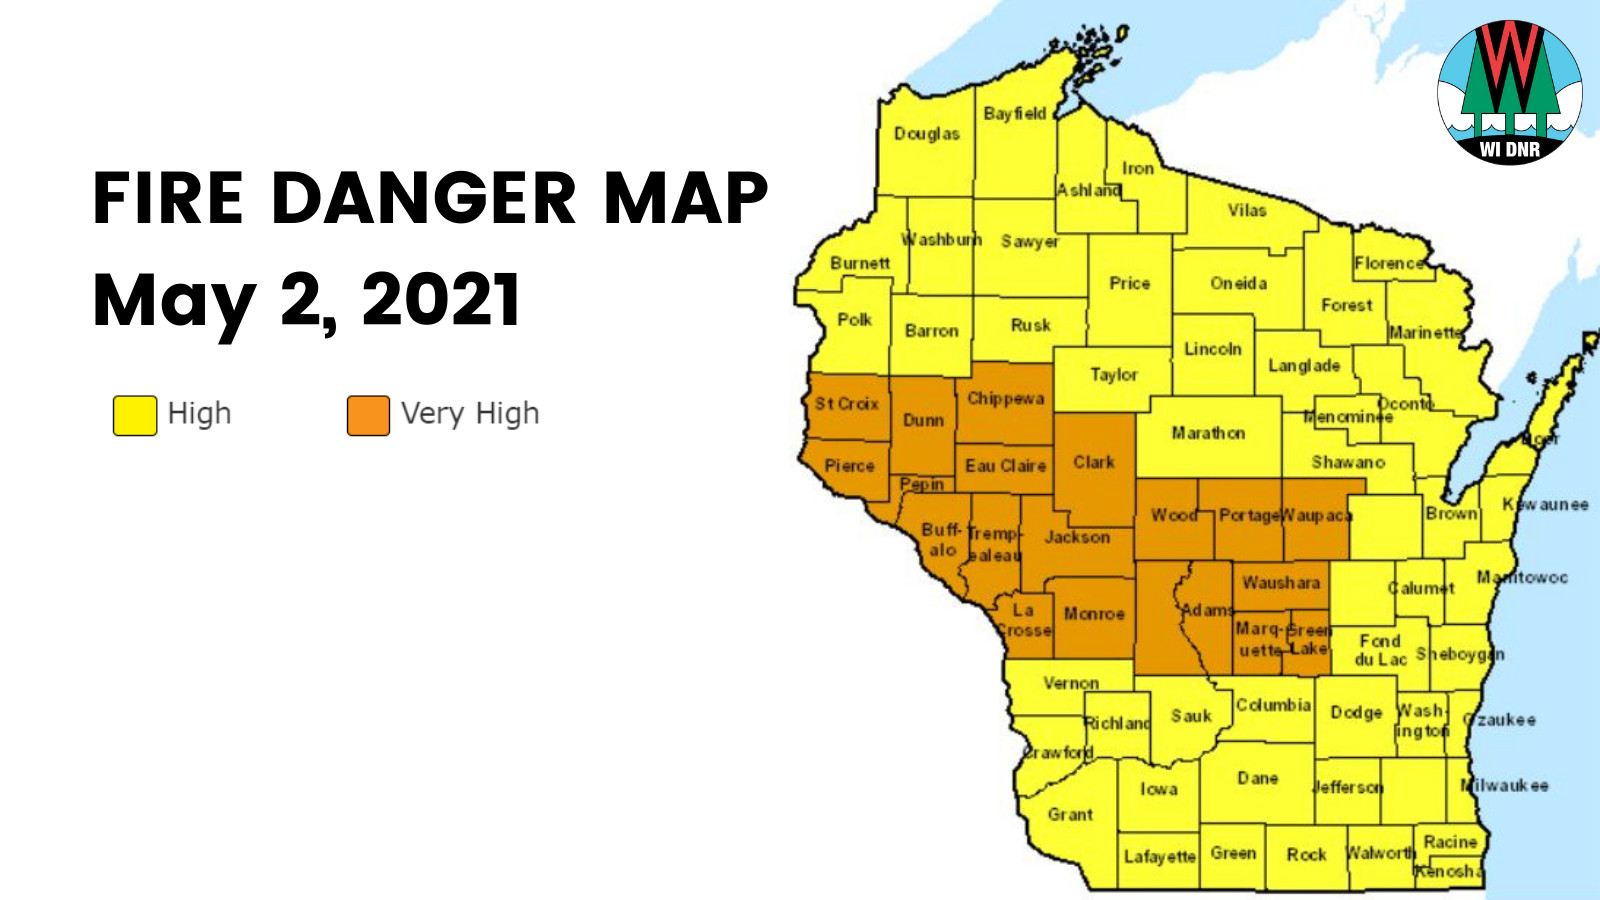 Fire Danger Remains Very High And High Across The State Wisconsin DNR